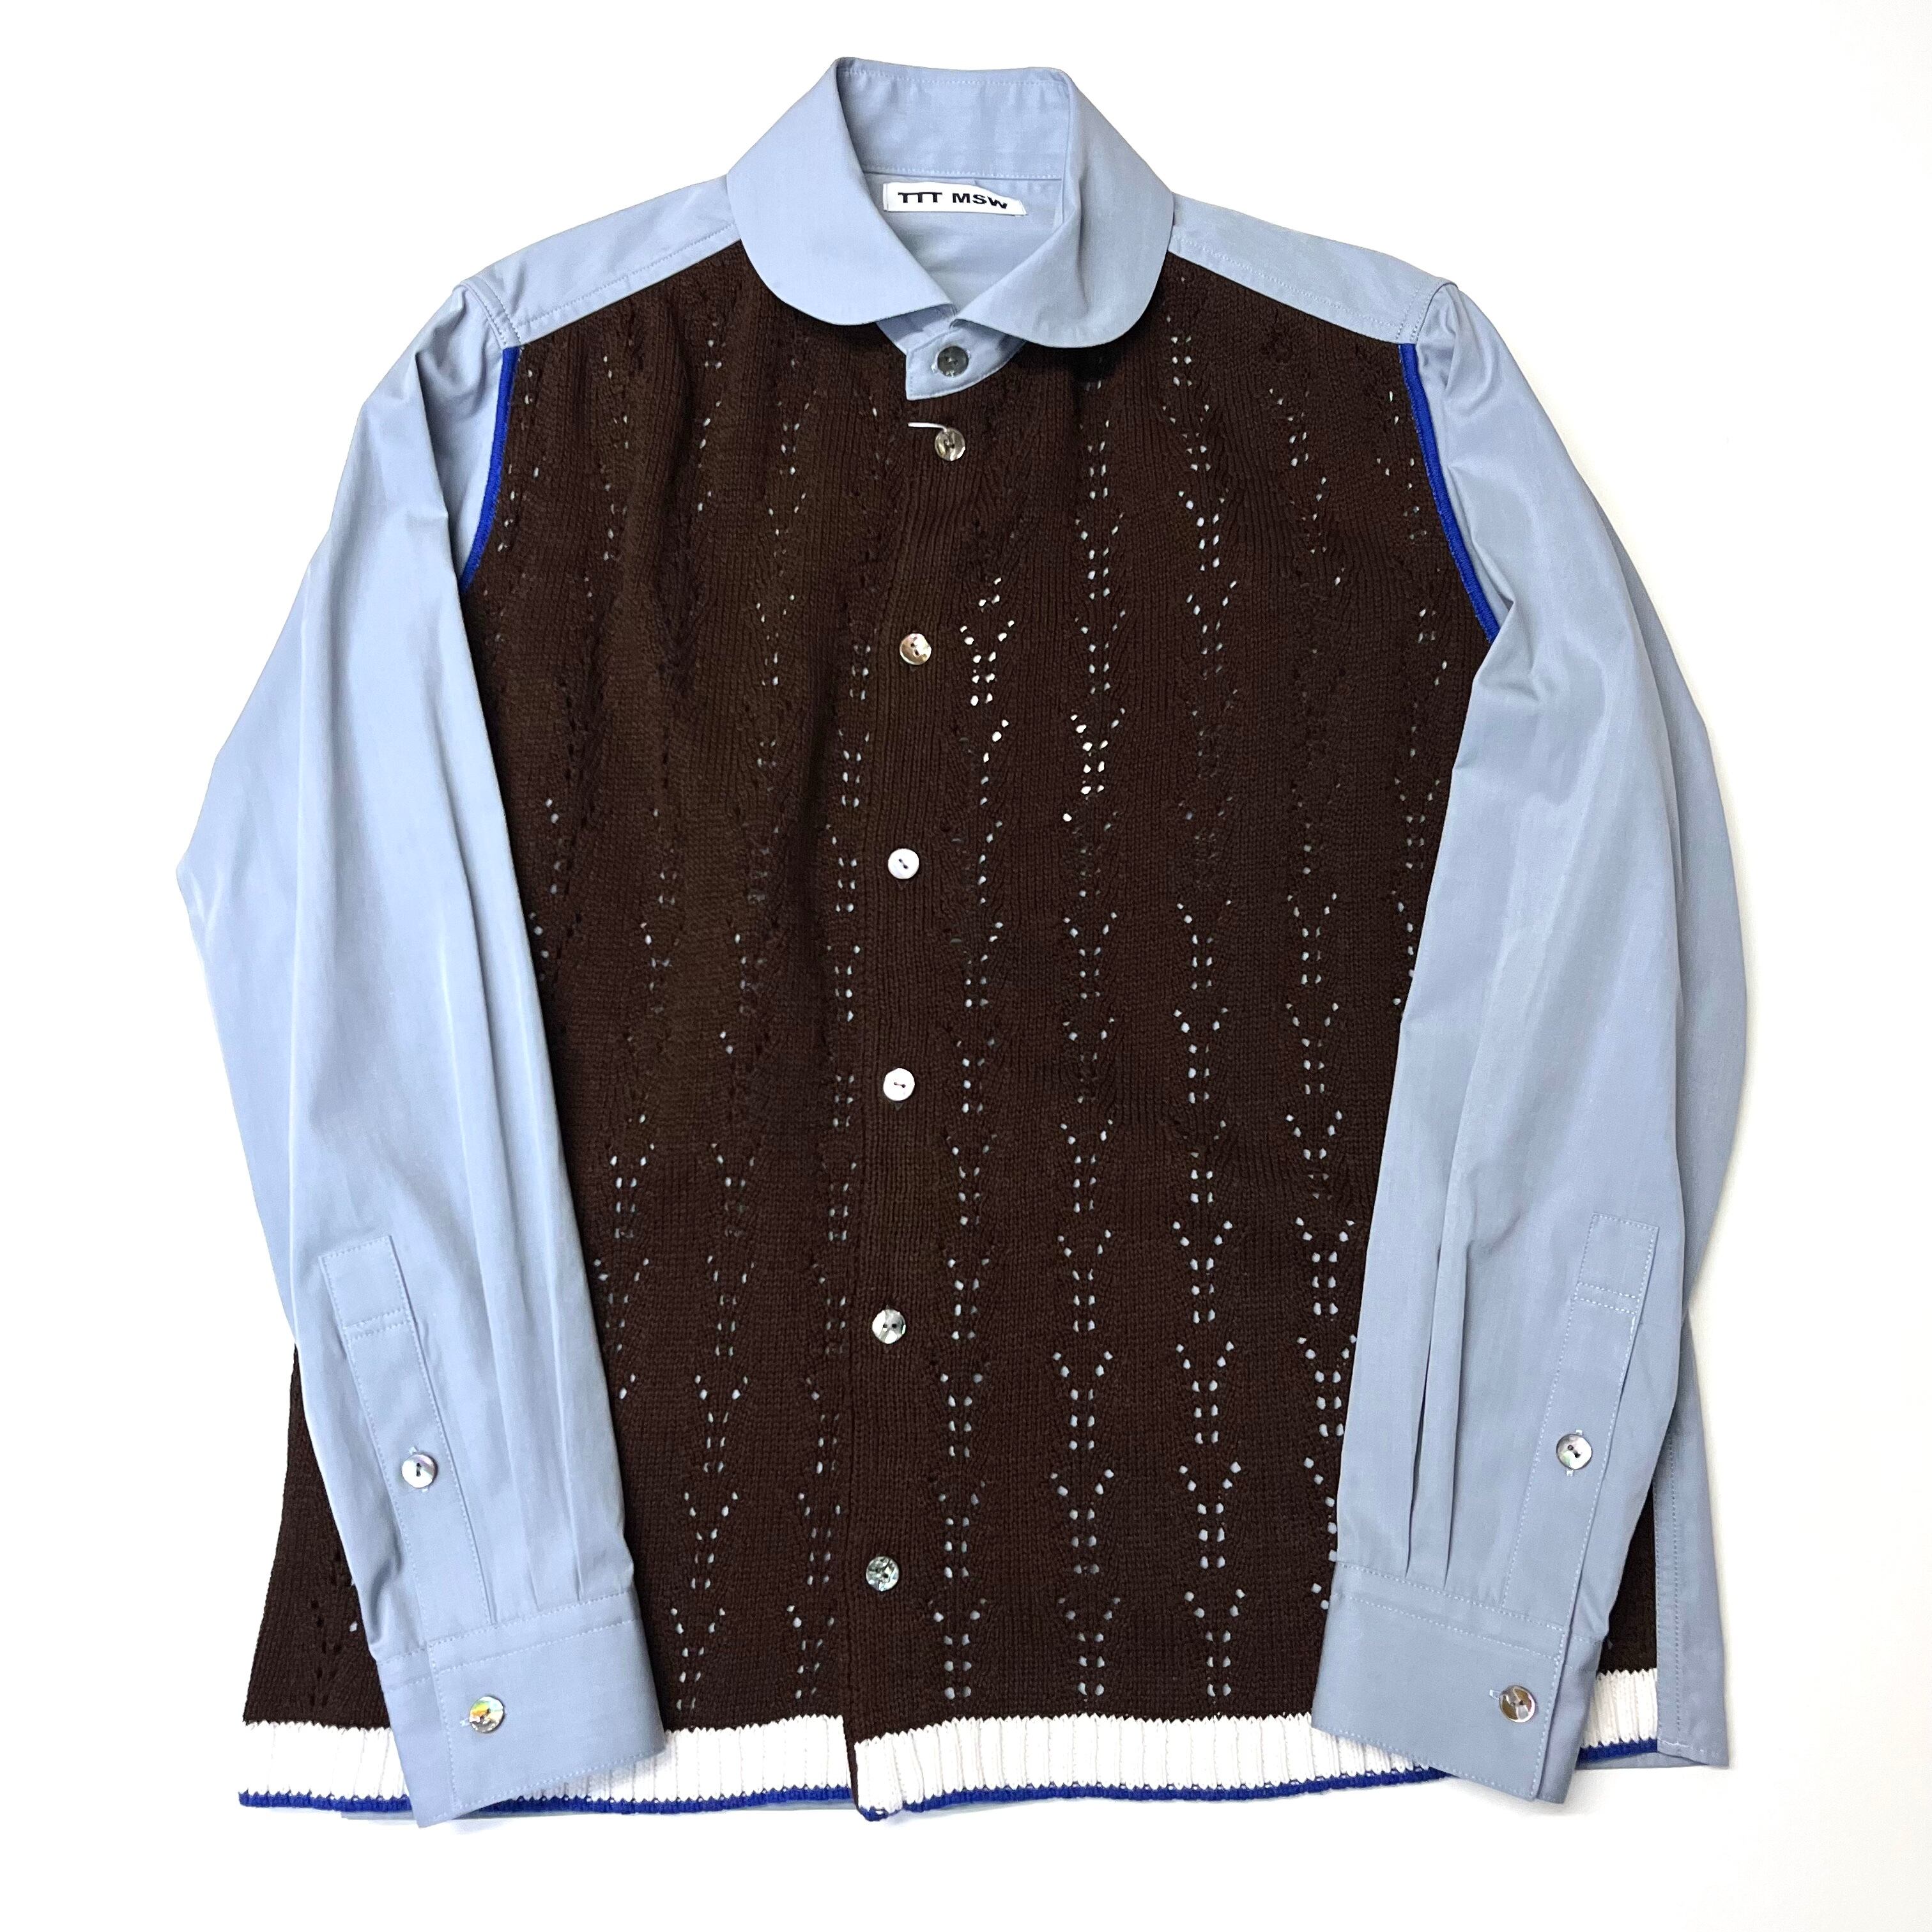 【TTT MSW】Knit cardigan docking shirt (blue)〈送料無料〉 | STORY powered by BASE